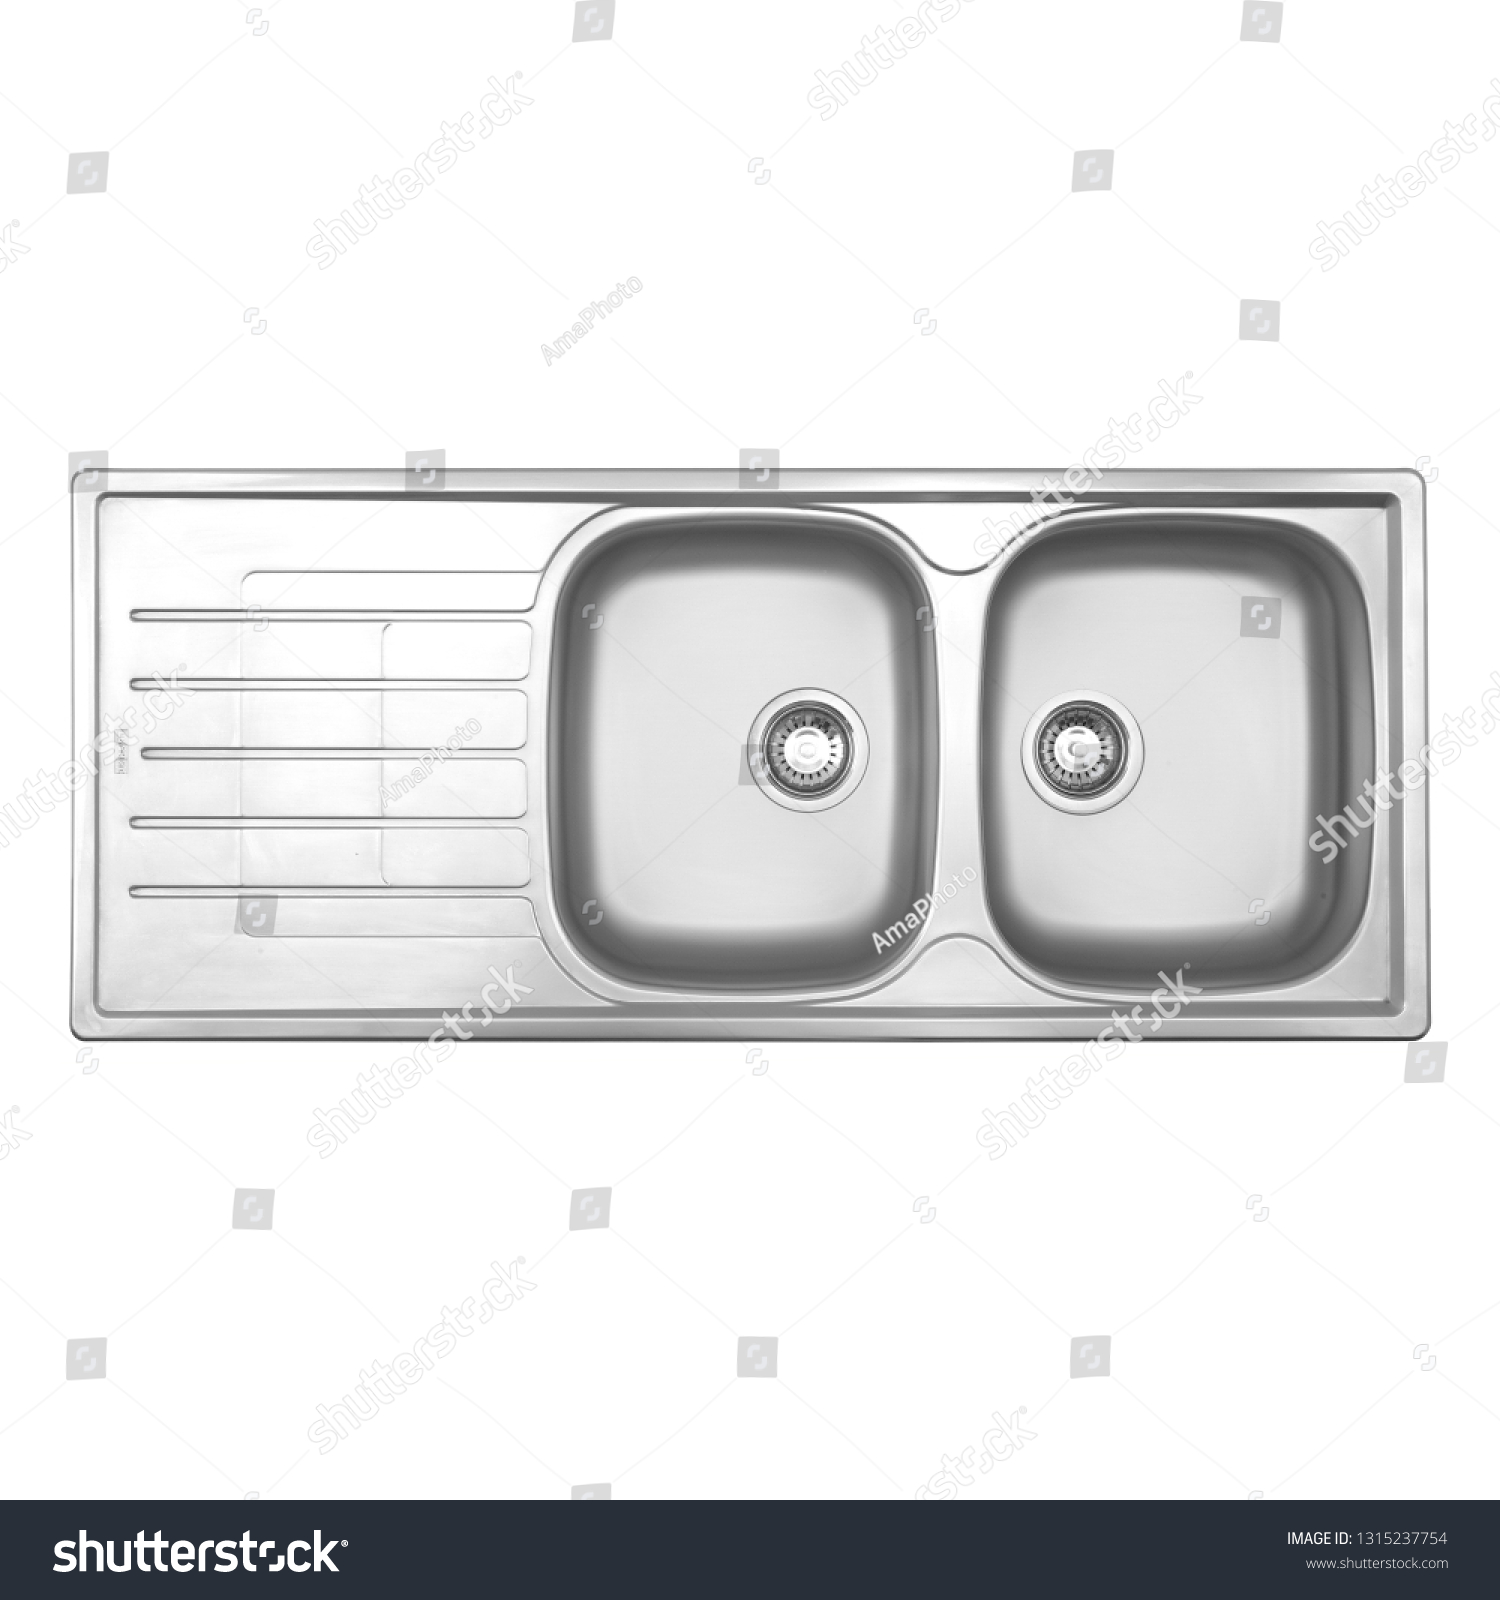 Kitchen Sink Top View Isolated On Stock Photo Edit Now 1315237754